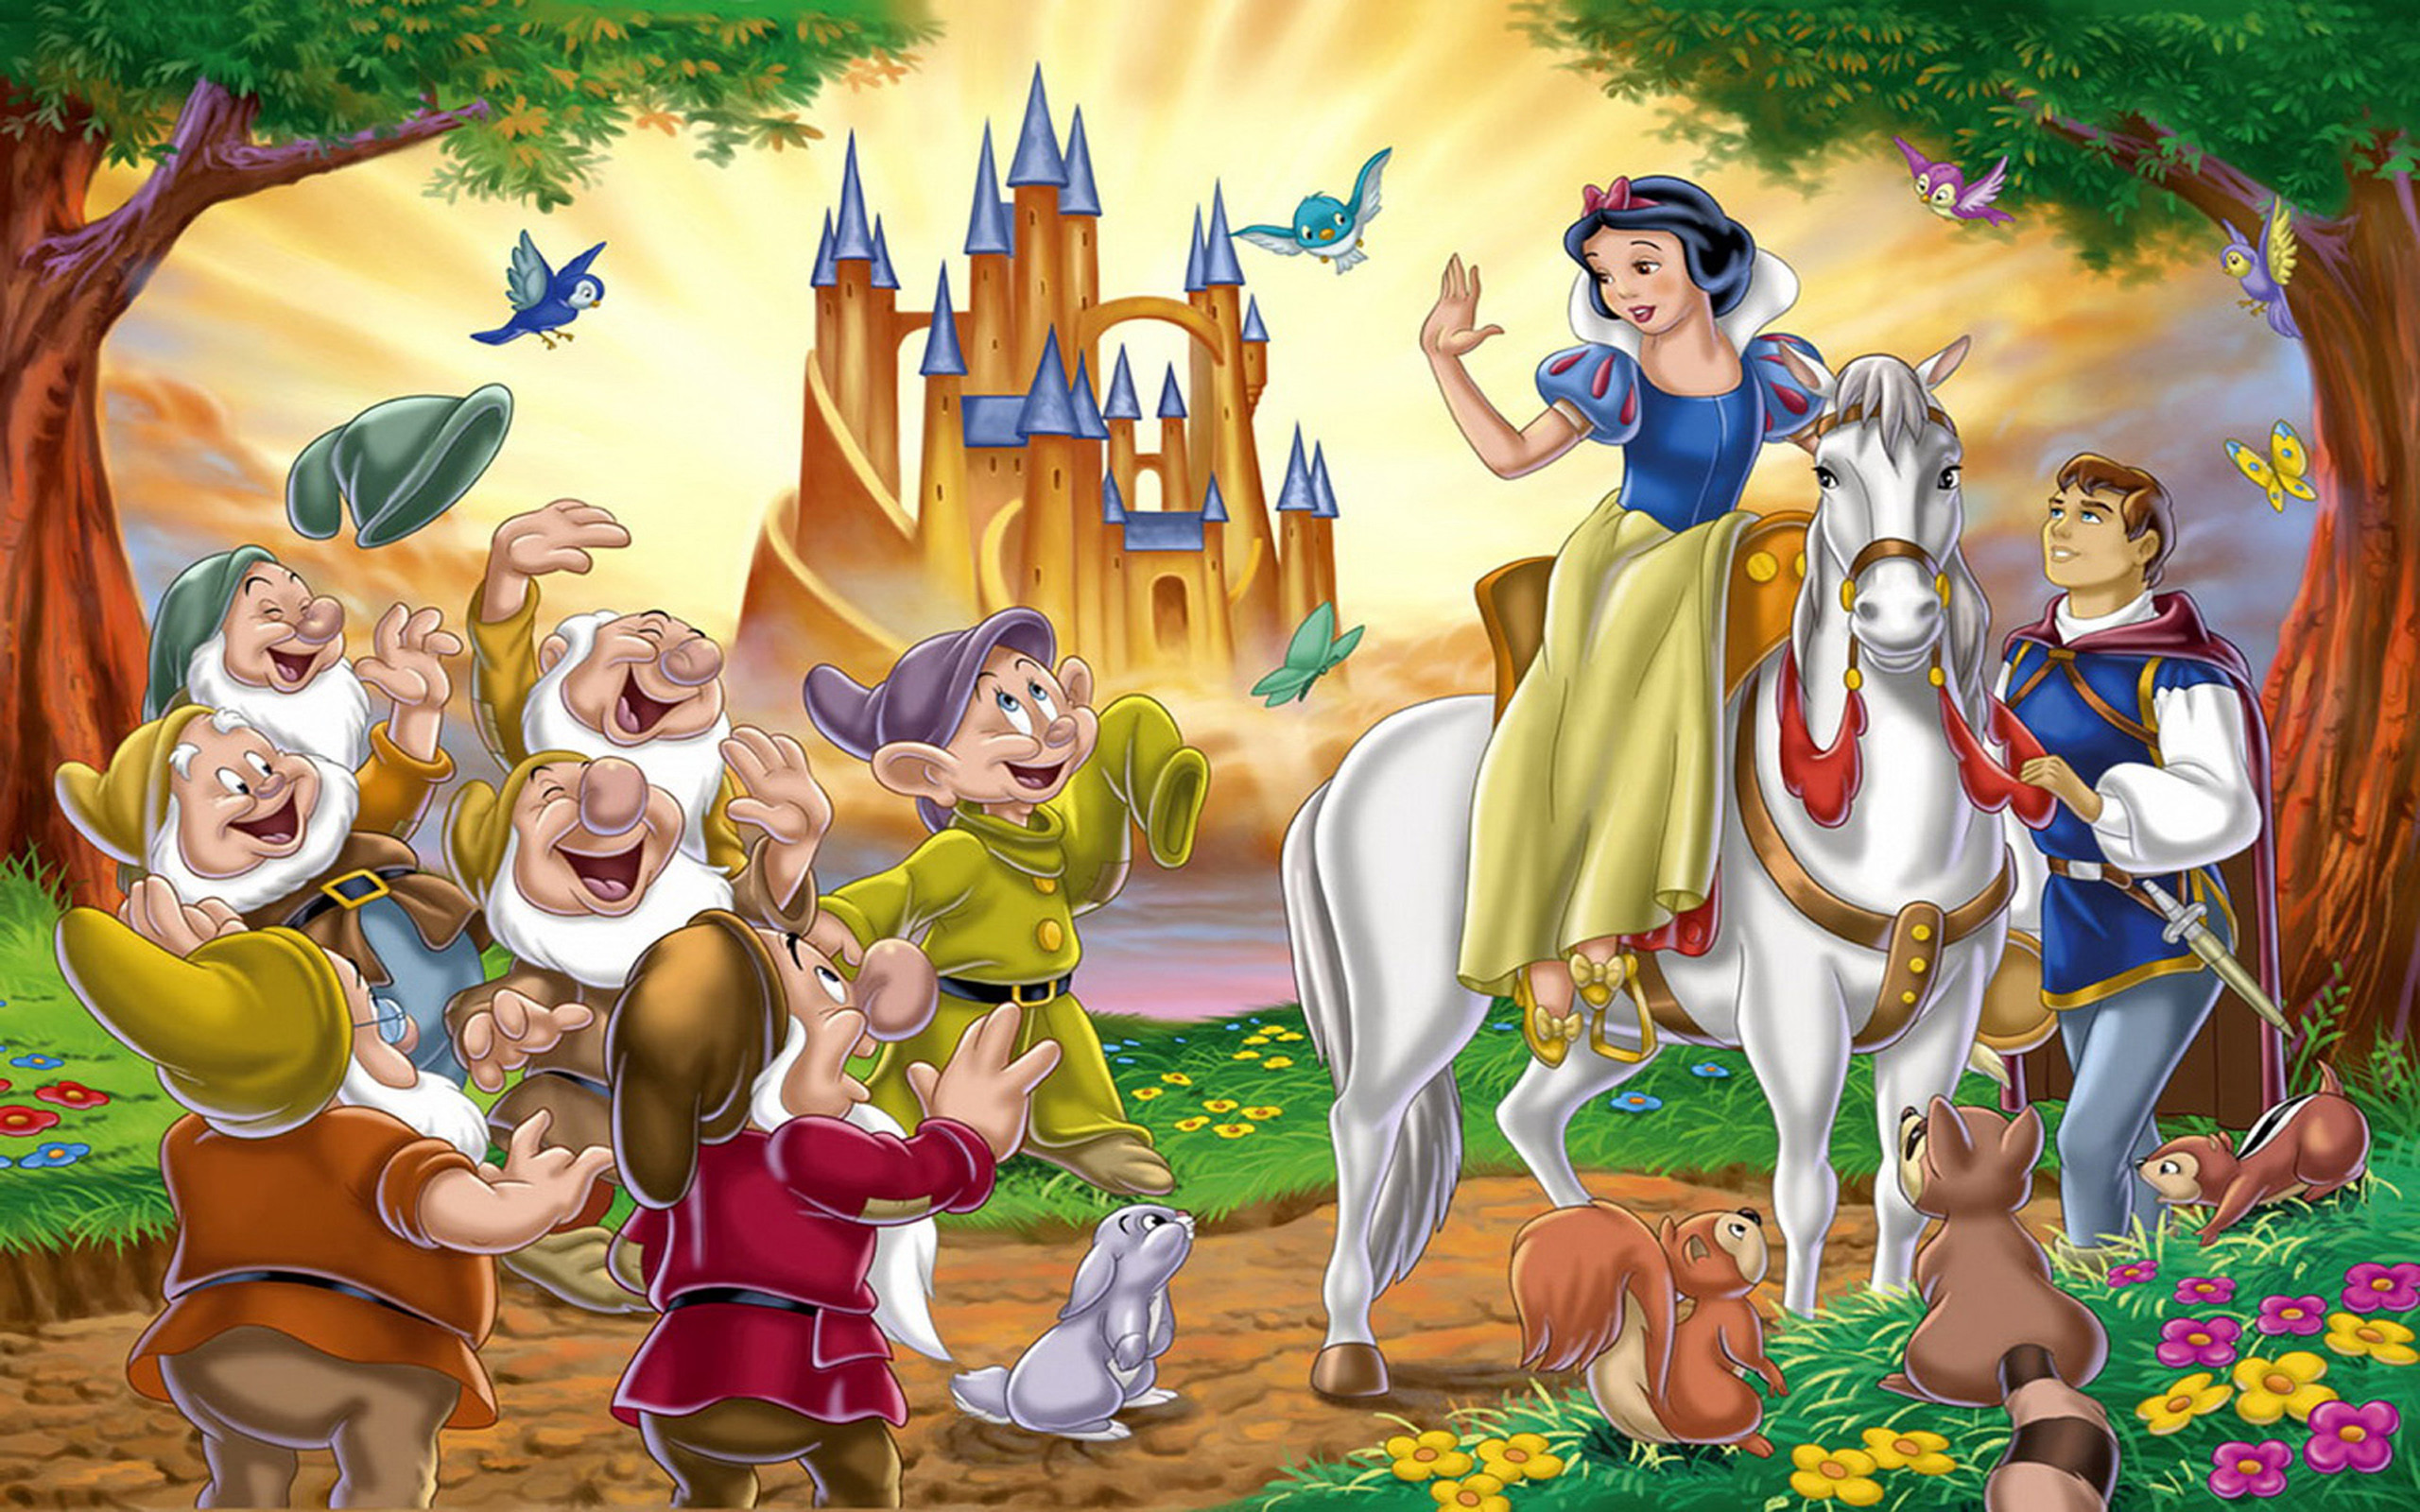 Aggregate more than 62 wallpaper of snow white - in.cdgdbentre